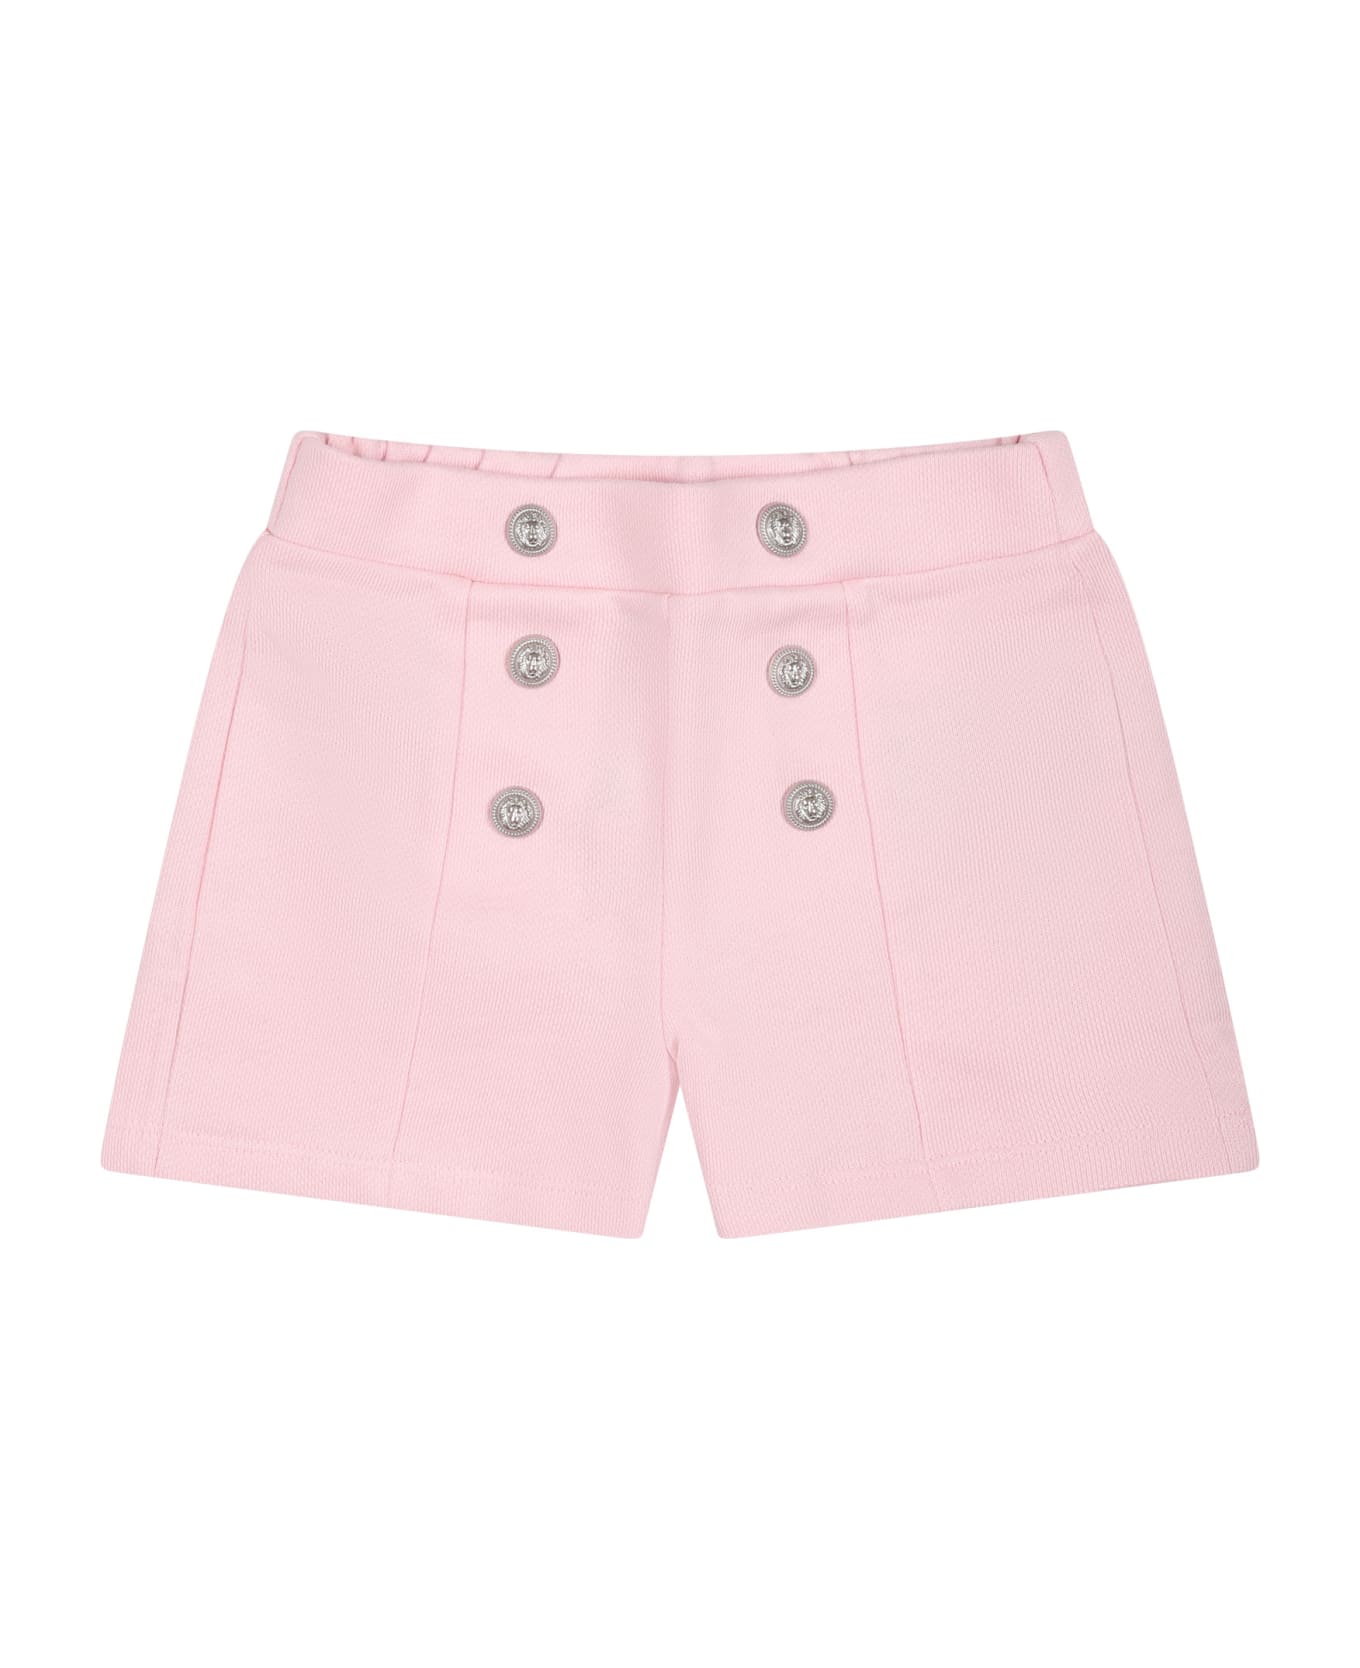 Balmain for Pink Shorts For Baby Girl With Silver Buttons - Pink